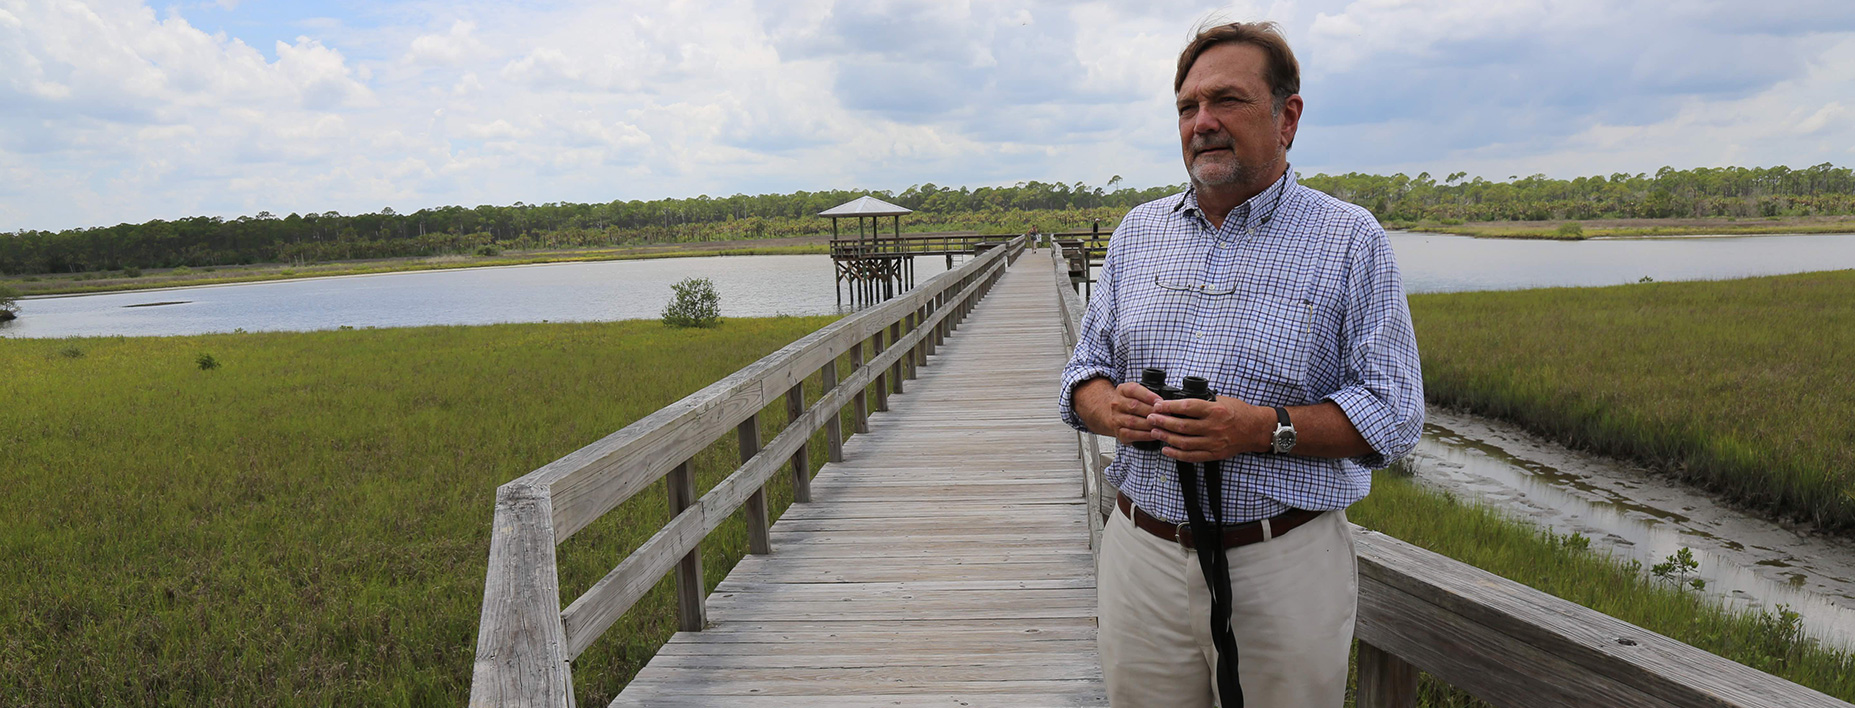 Clay Henderson stands in Spruce Creek Park with pretty river and wooden walkway behind him.